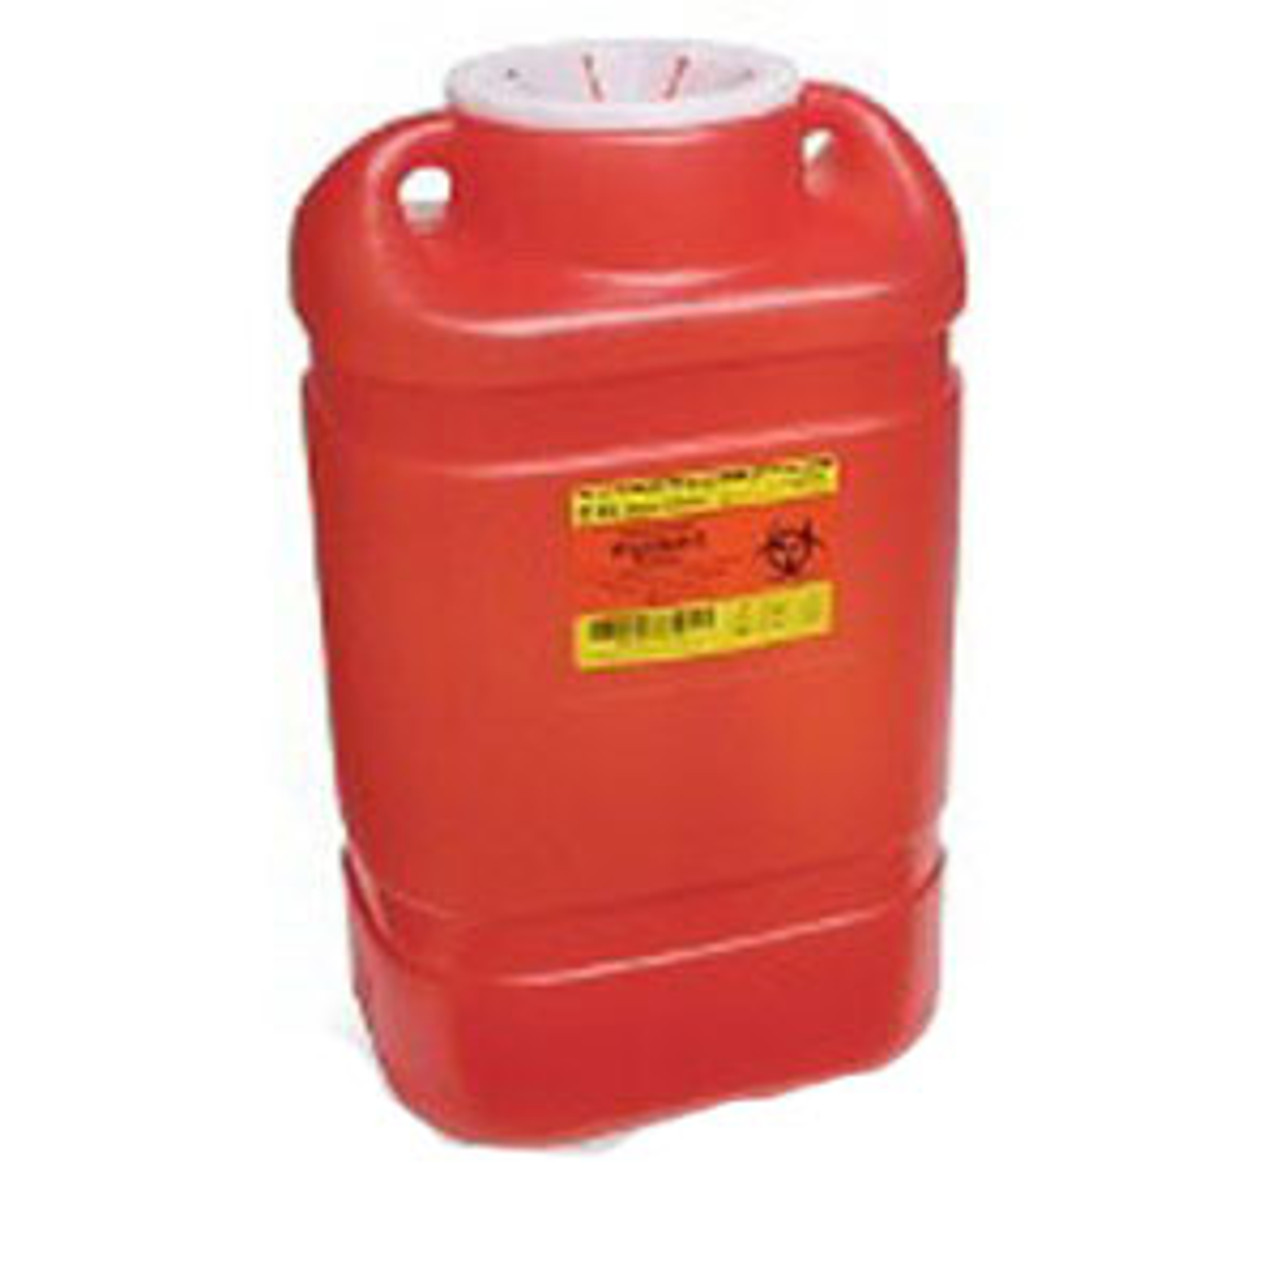 SharpSafety Sharps Container 2 gal. Vertical Entry, Red